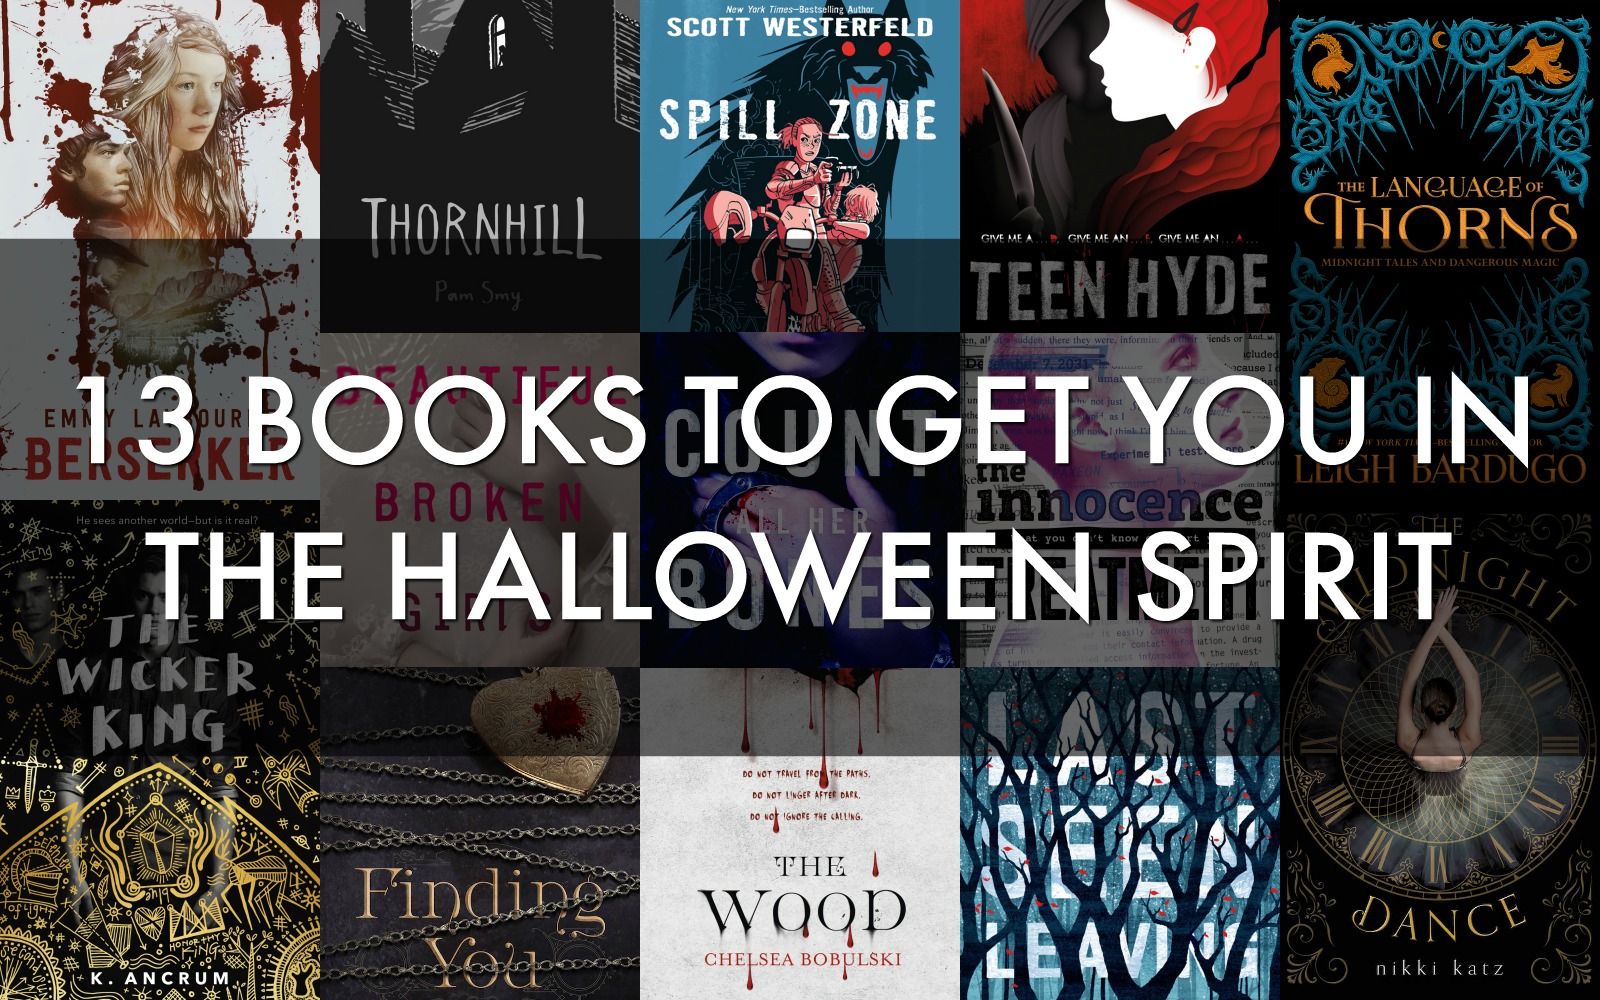 13 Books to Get You in the Halloween Spirit